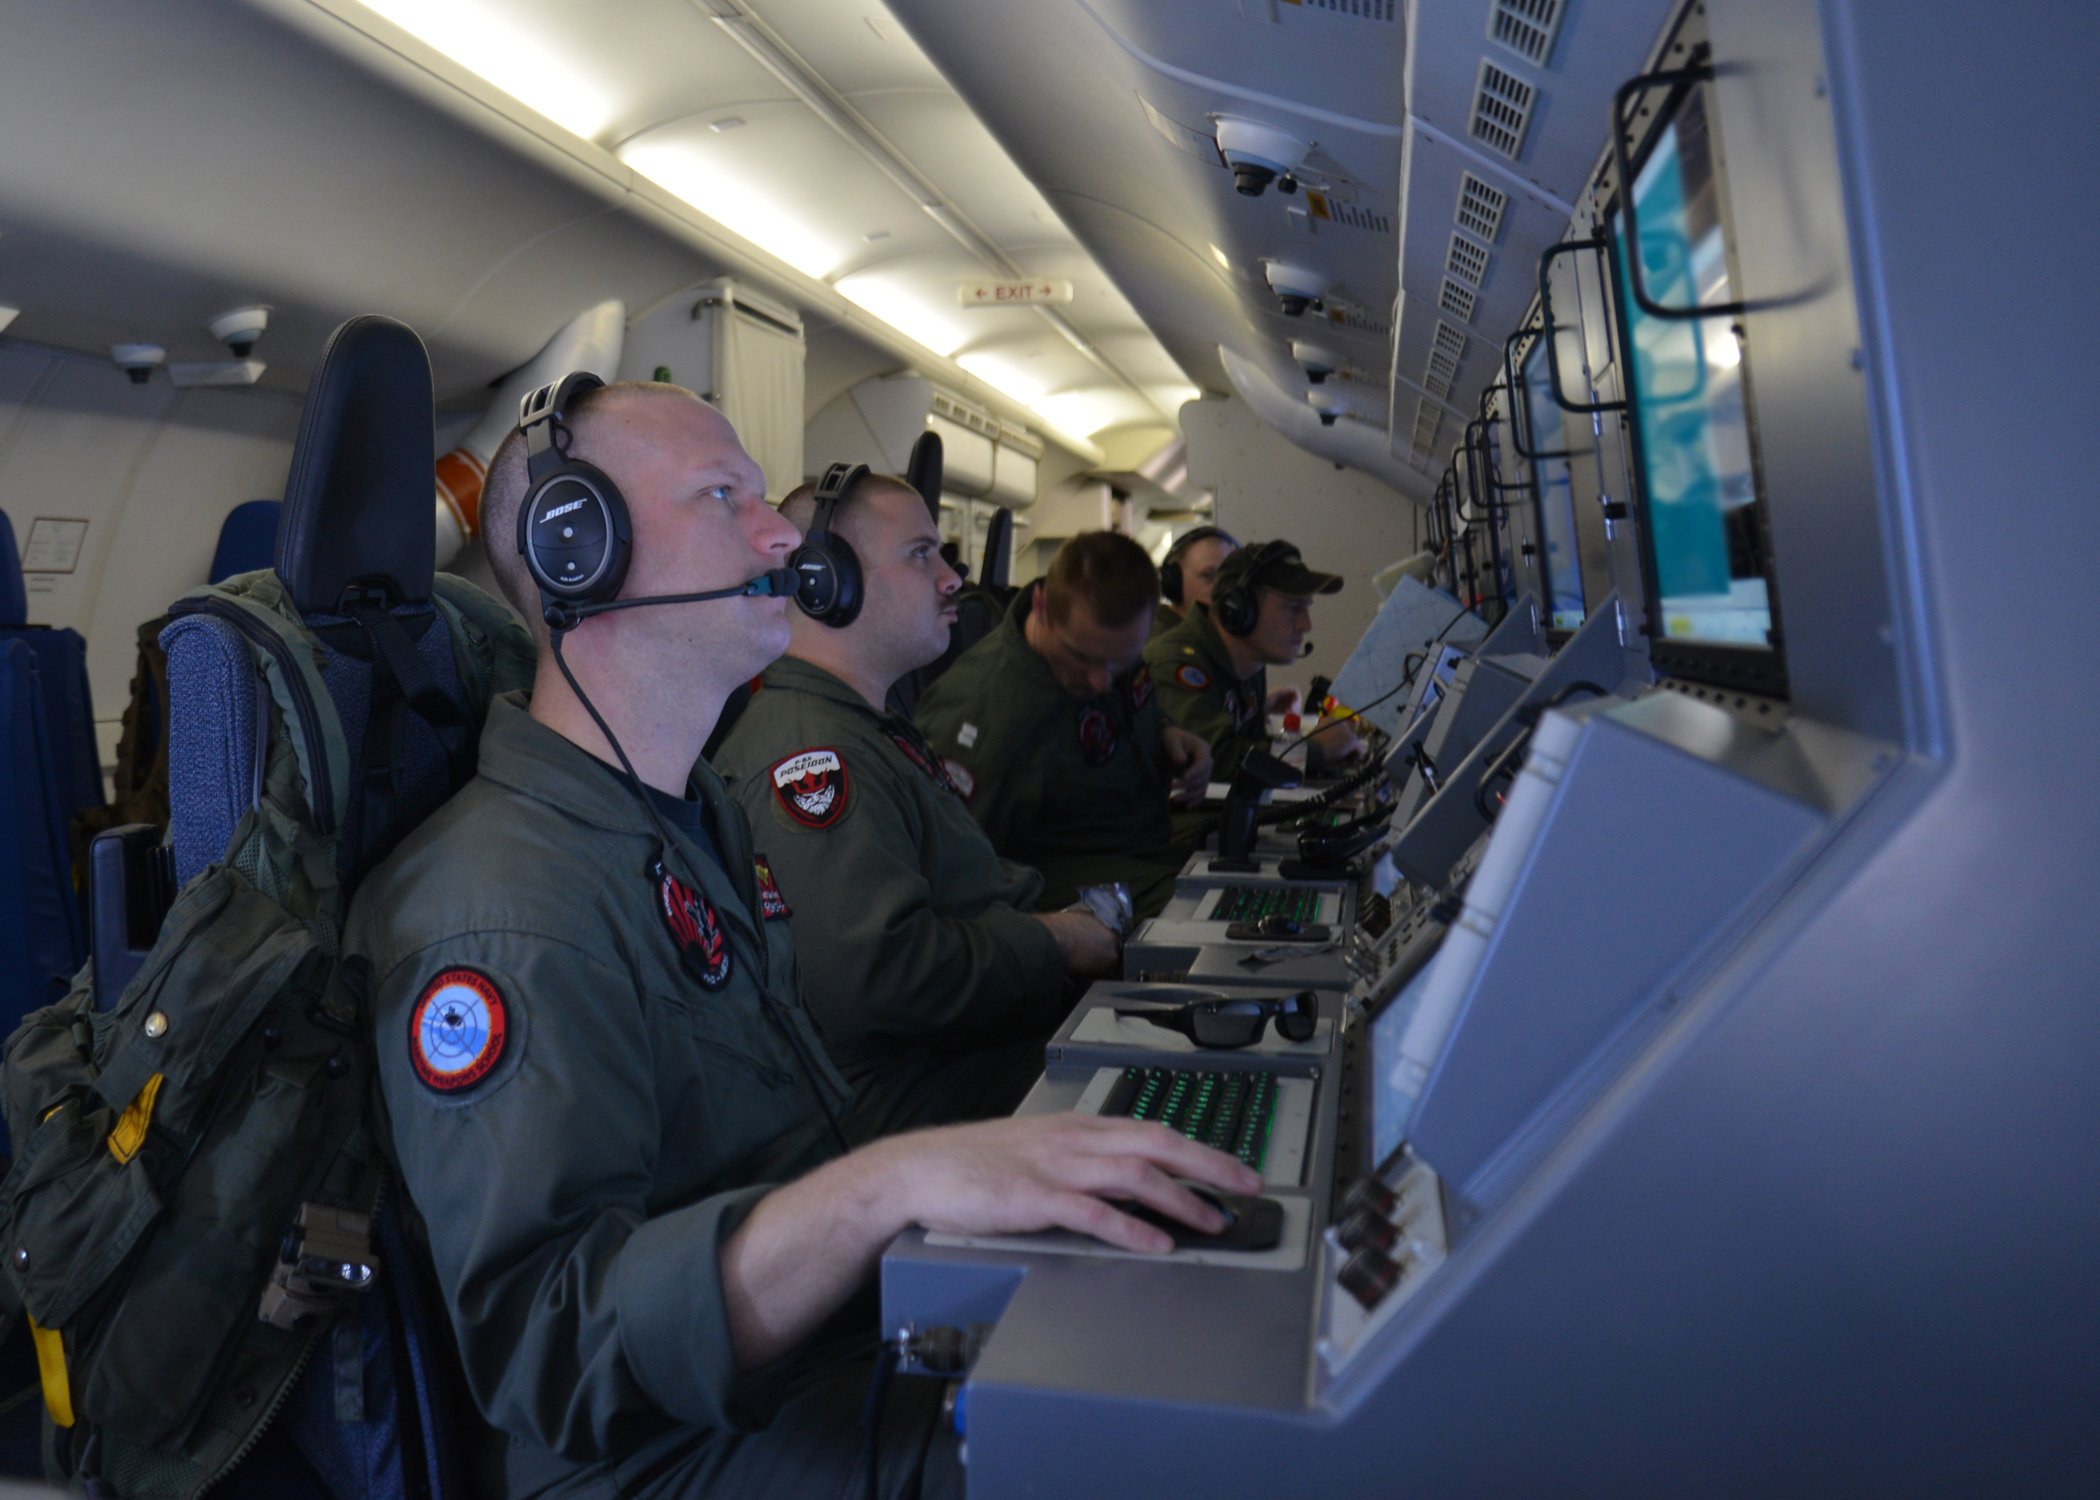 Crew members on board a P-8A Poseidon assigned to Patrol Squadron (VP) 16 man their workstations while assisting in search and rescue operations for Malaysia Airlines flight MH370 on March, 16 2014. US Navy Photo